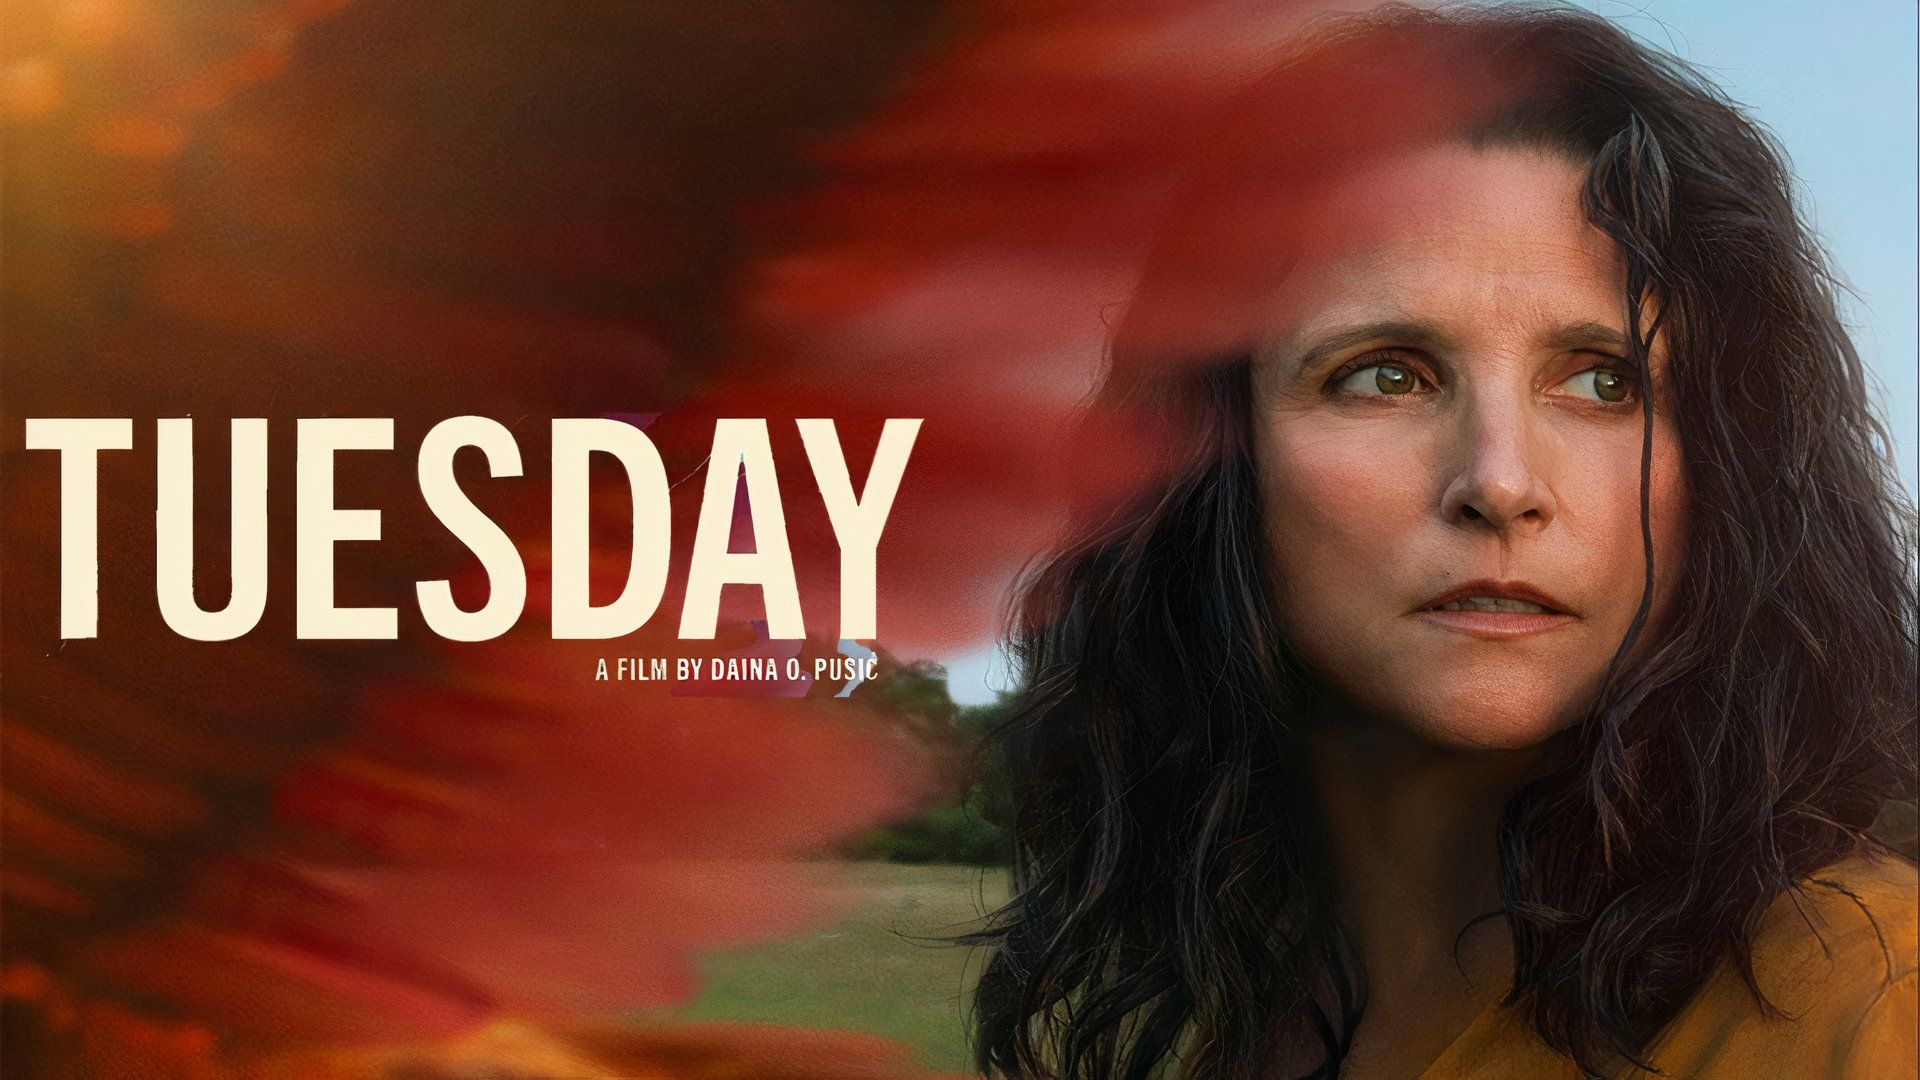 Julia Louis-Dreyfus as Zorra looking off-screen with a bird wing covering part of the frame in Tuesday